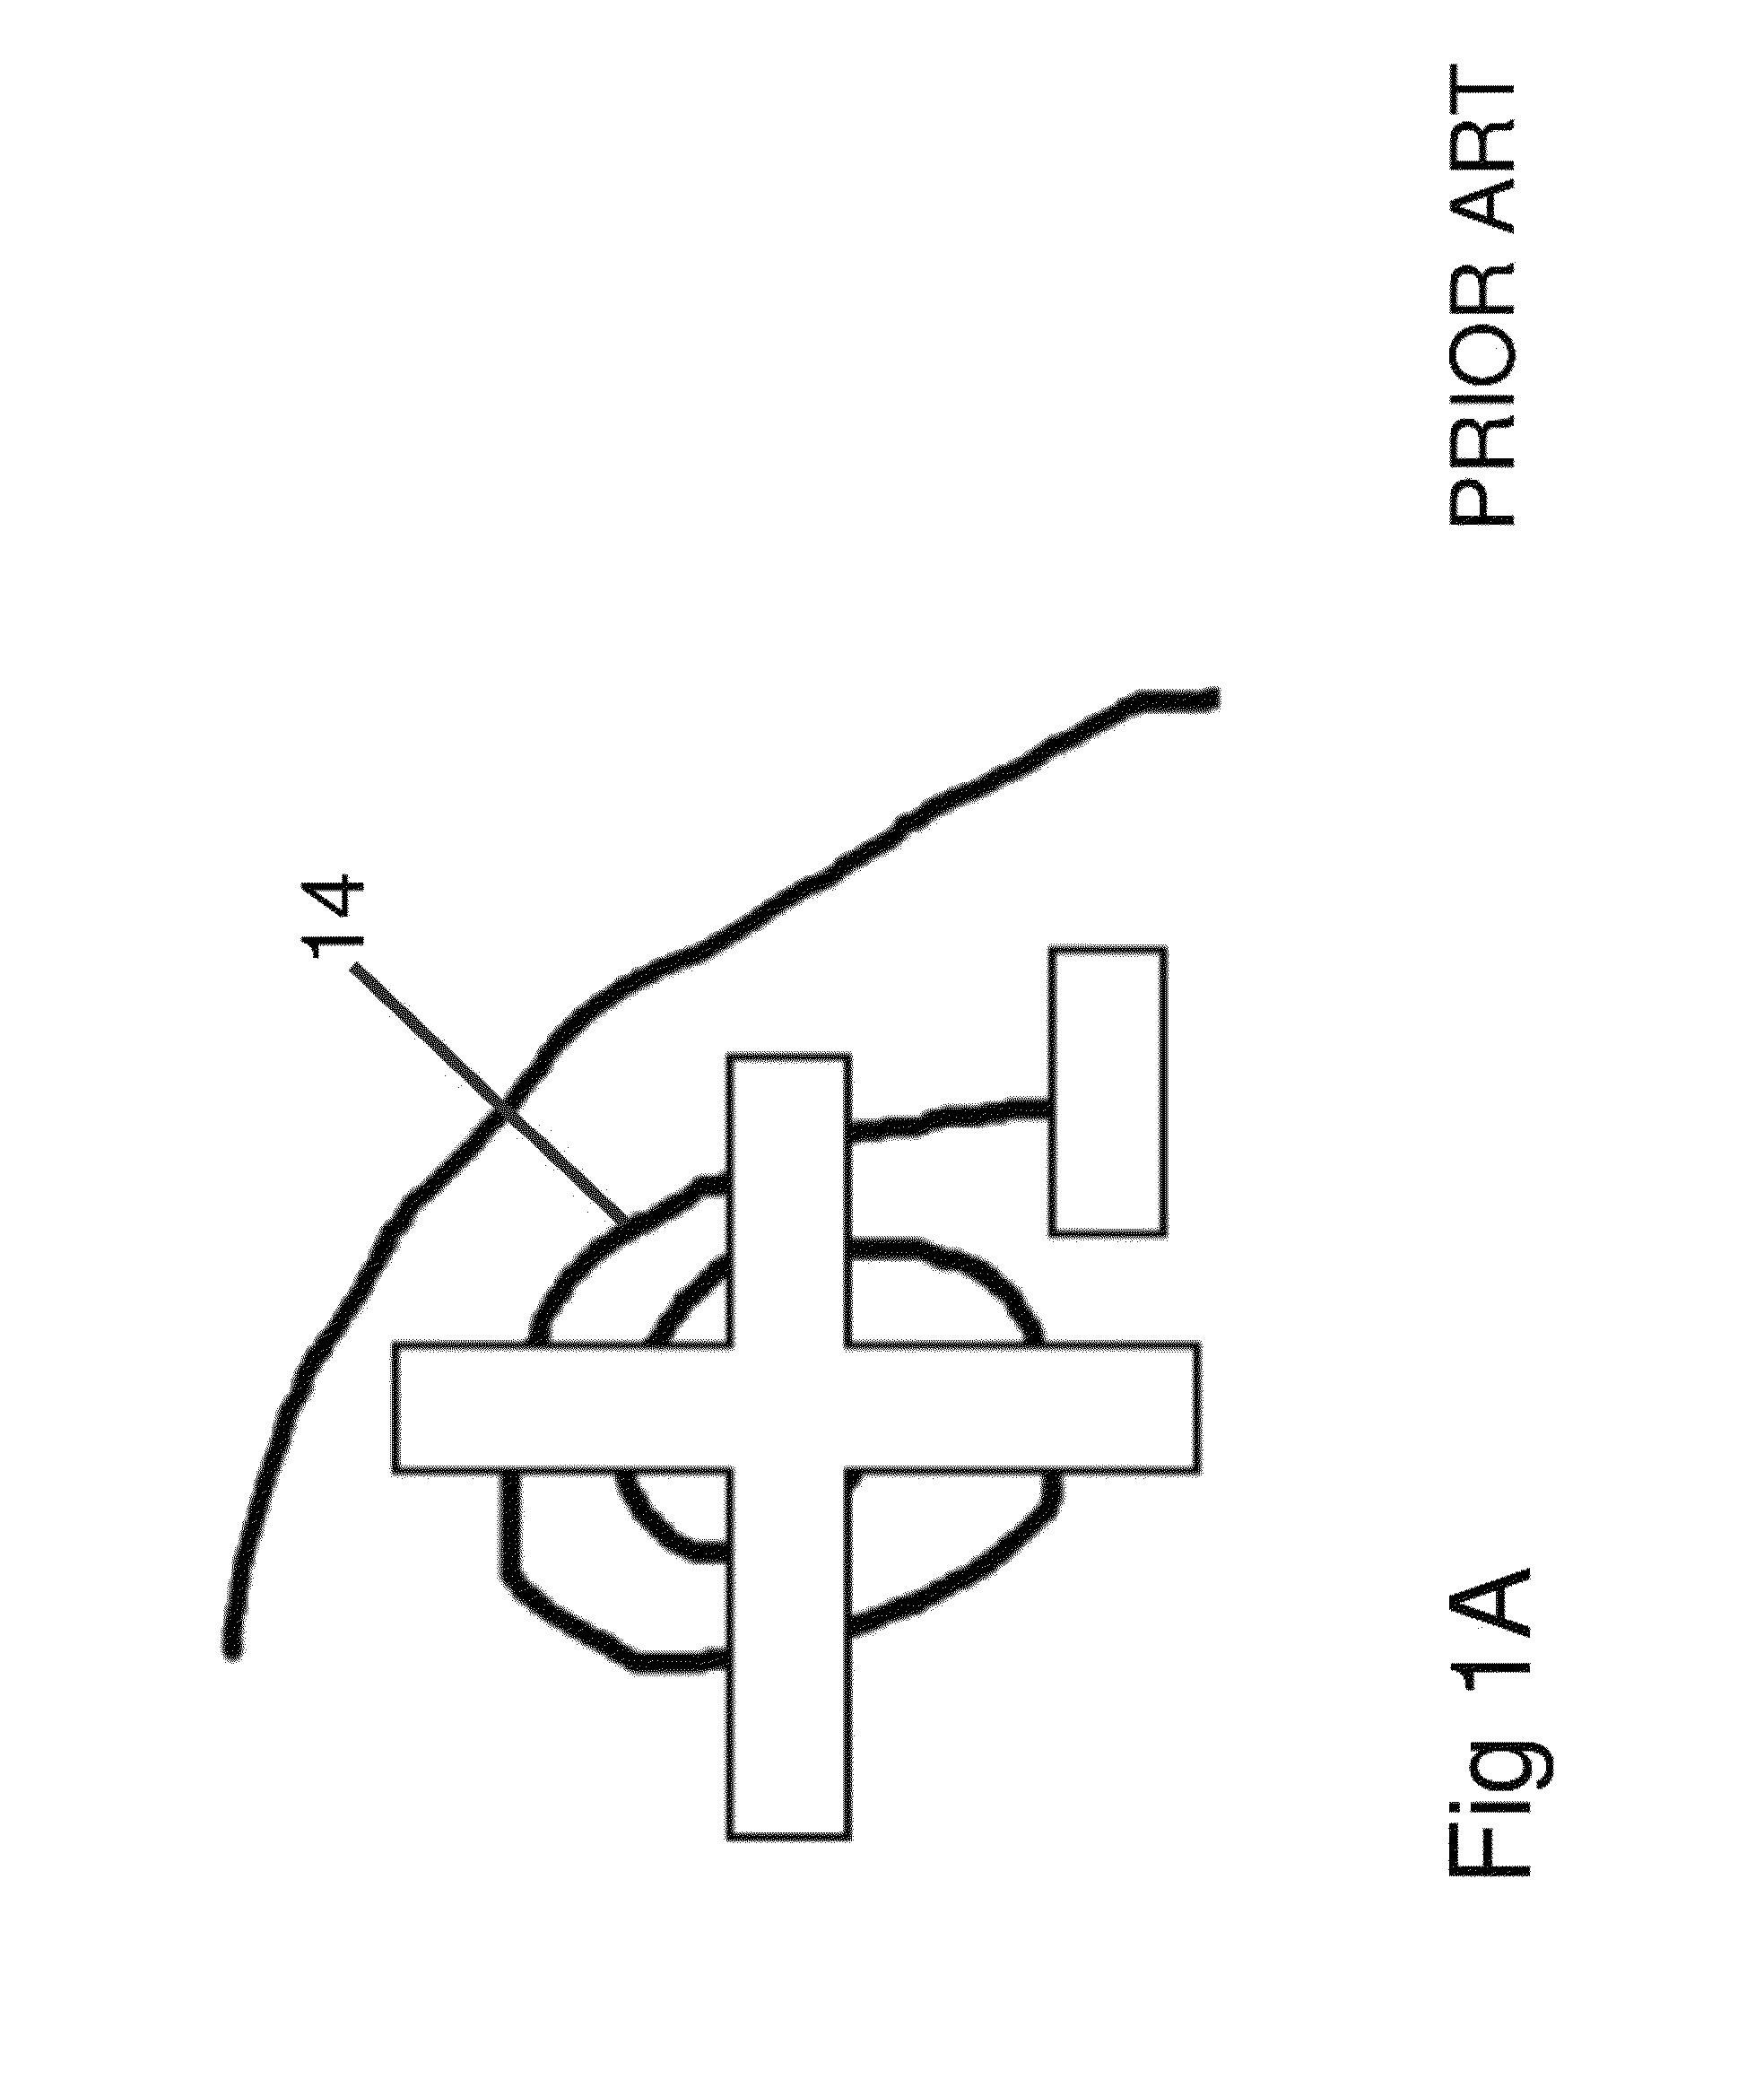 Patient safety and wellbeing device for covering wires and needles used in mammography or ultrasound guided needle localization